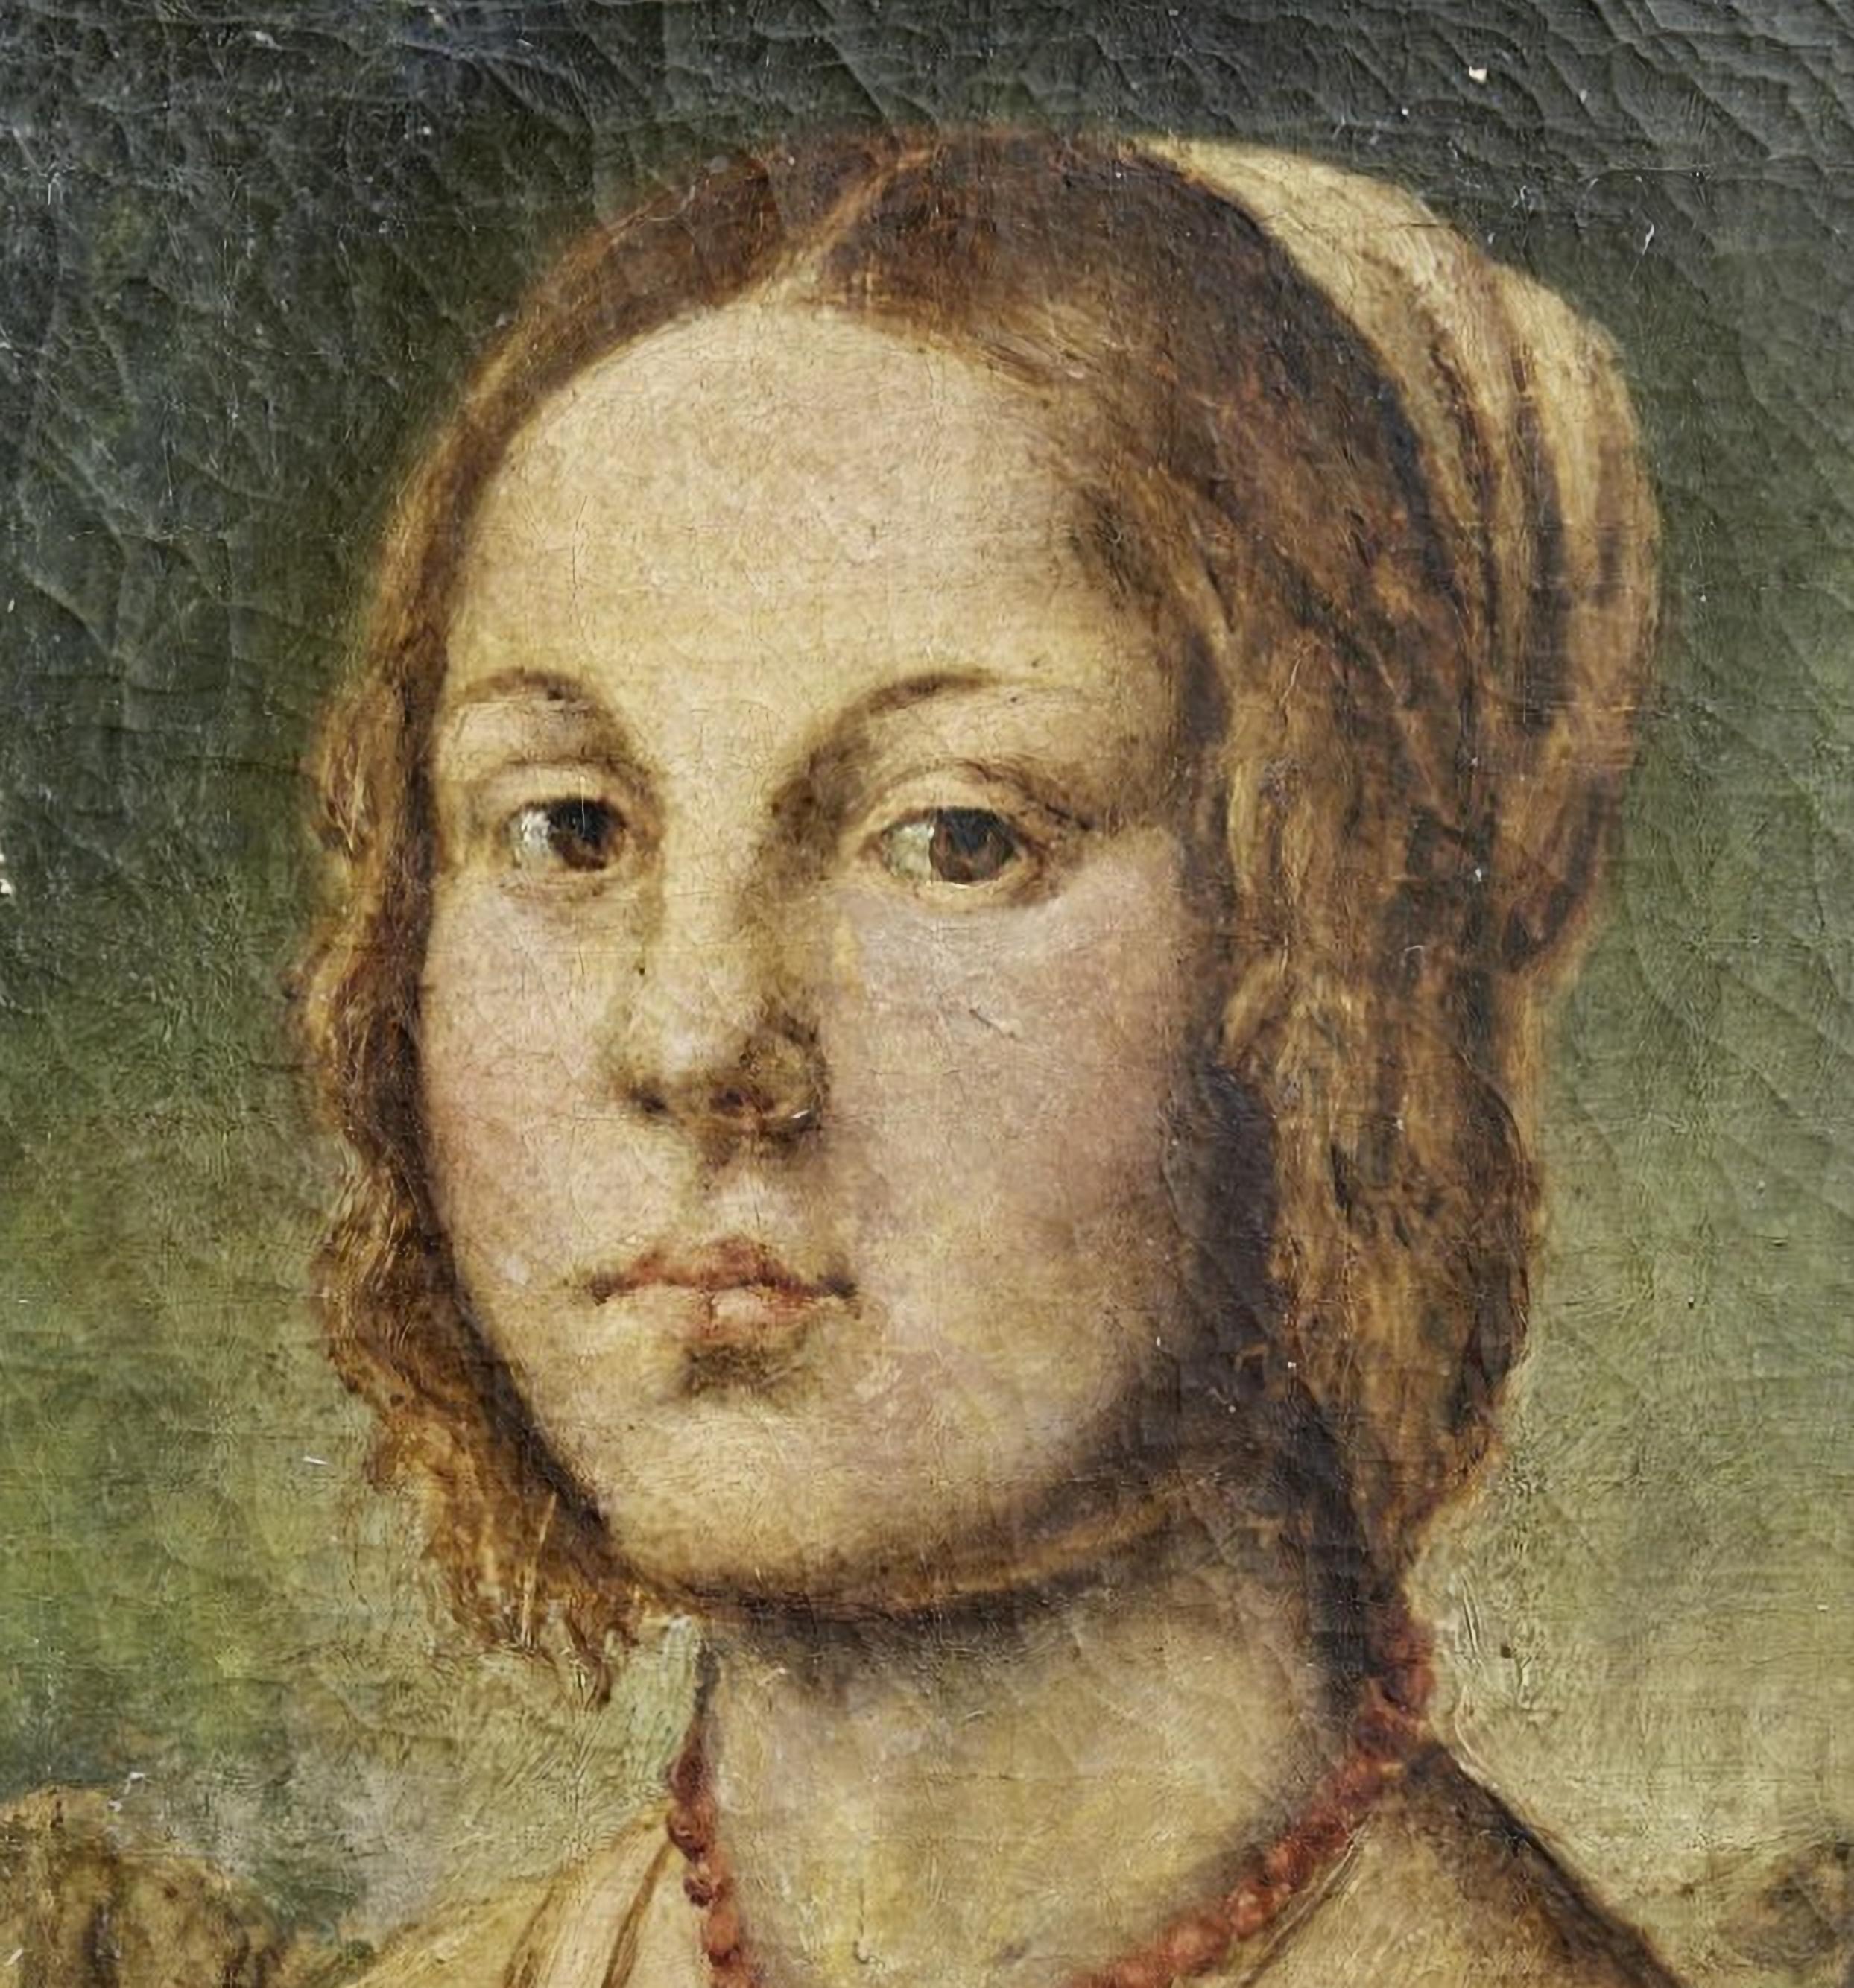 Portrait of a Young Woman - Central Italy end 16th century,
Oil painting on canvas. 48.5x30.5cm; not framed. 
Small losses of color in the margin
Good condition for the age.